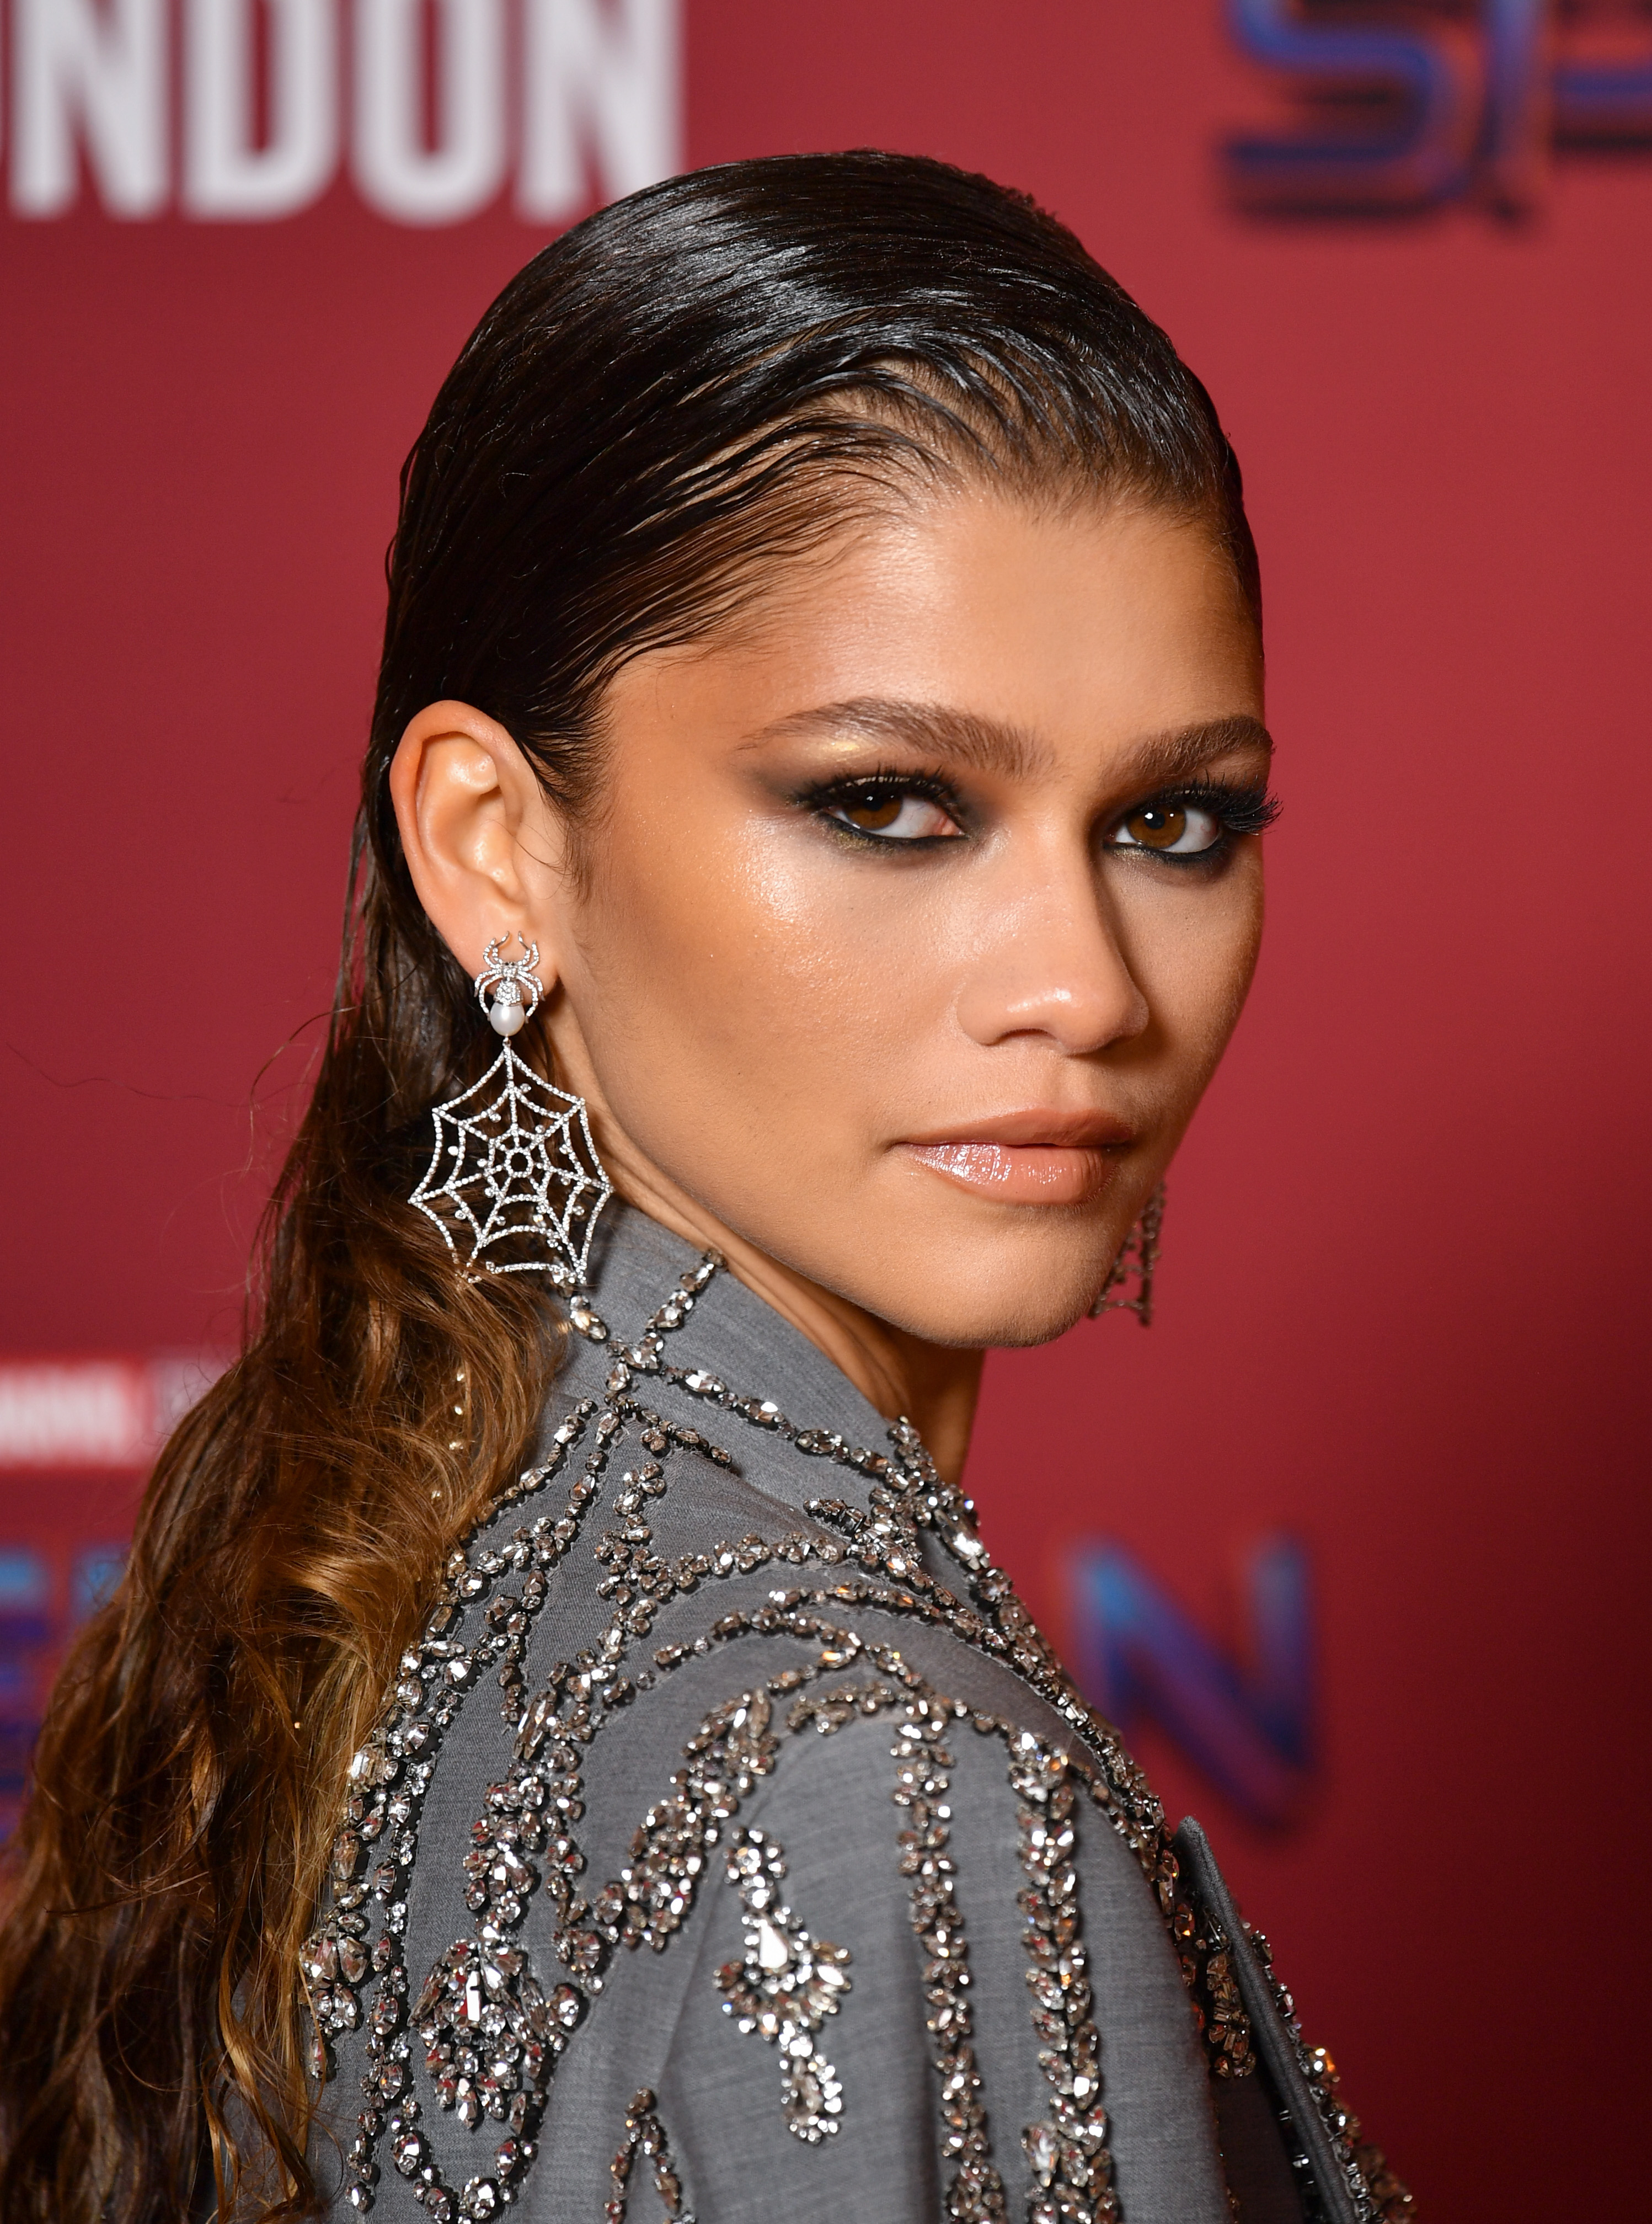 Zendaya attends a photocall for "Spiderman: No Way Home" at The Old Sessions House in London, England, on December 5, 2021. | Source: Getty Images